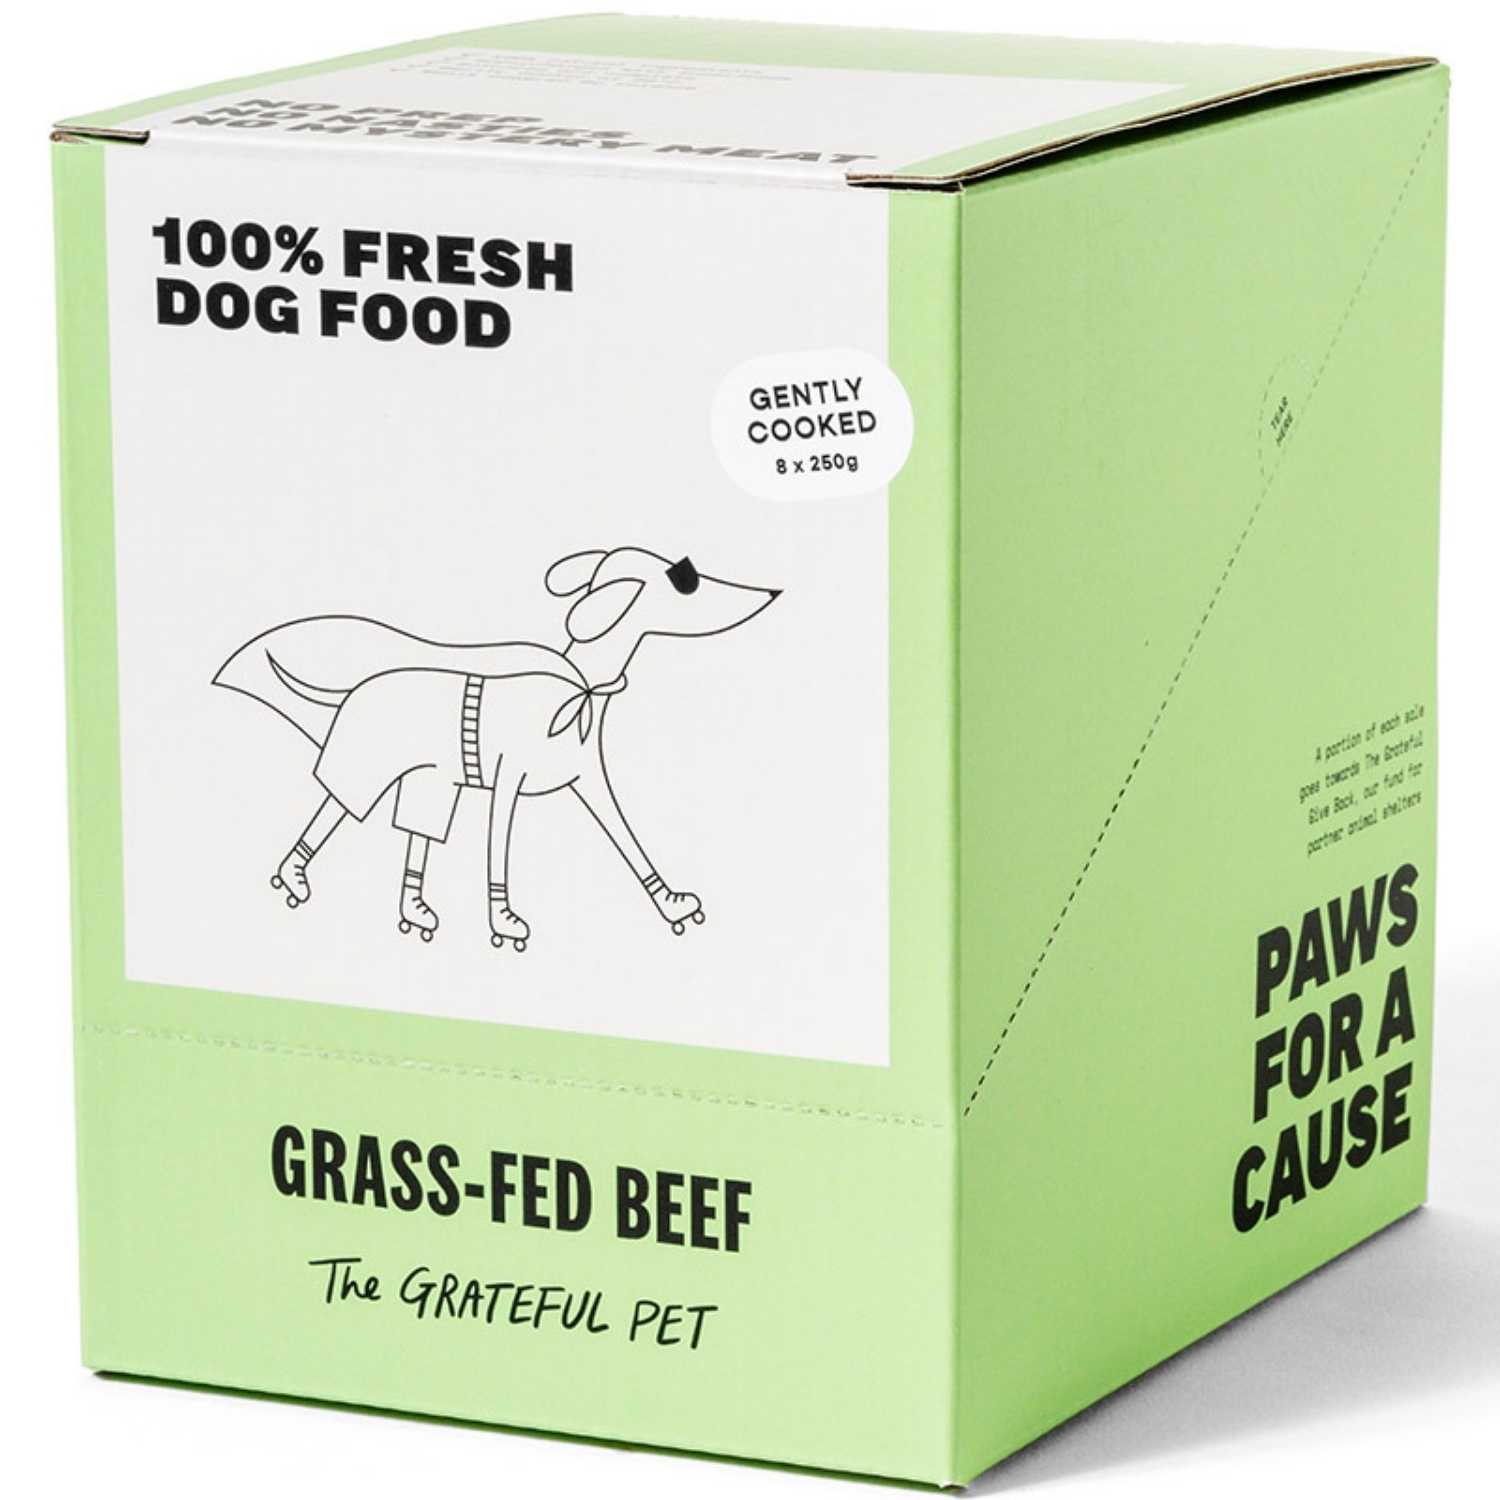 The Grateful Pet - Gently Cooked (Grass-Fed Beef) - Dog (8 x 250g Pouch) Food (Case)